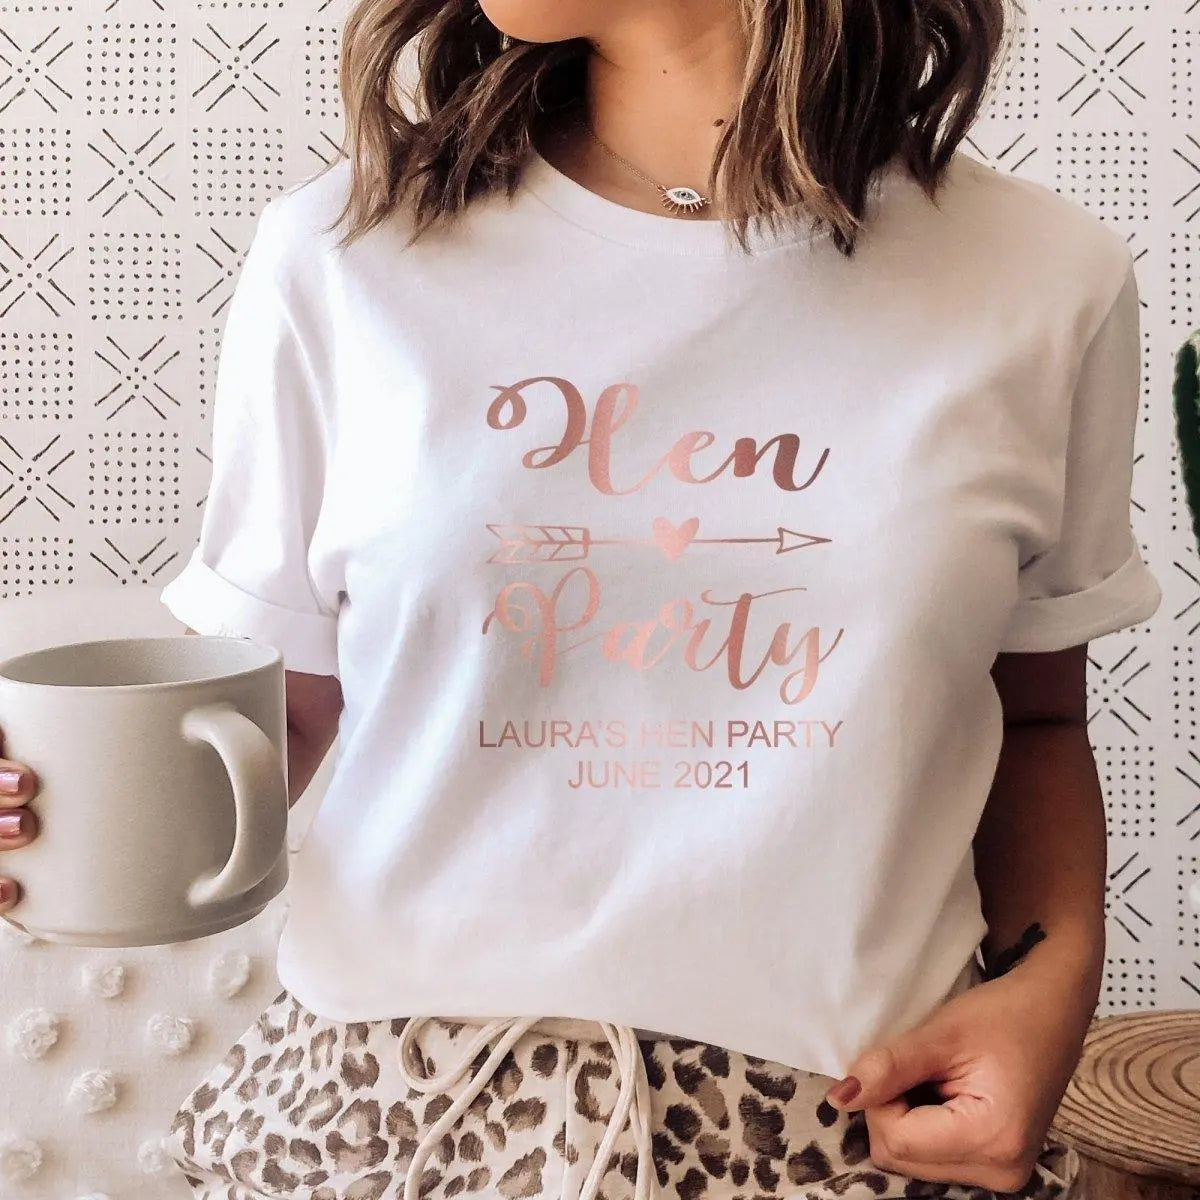 Personalised Bride Tribe Hen Party T-shirt, Rose Gold Hen Night T-shirts, Rose Gold Hen Party Tops, Bride To Be Tops, Bride Tribe Party Tops - Amy Lucy